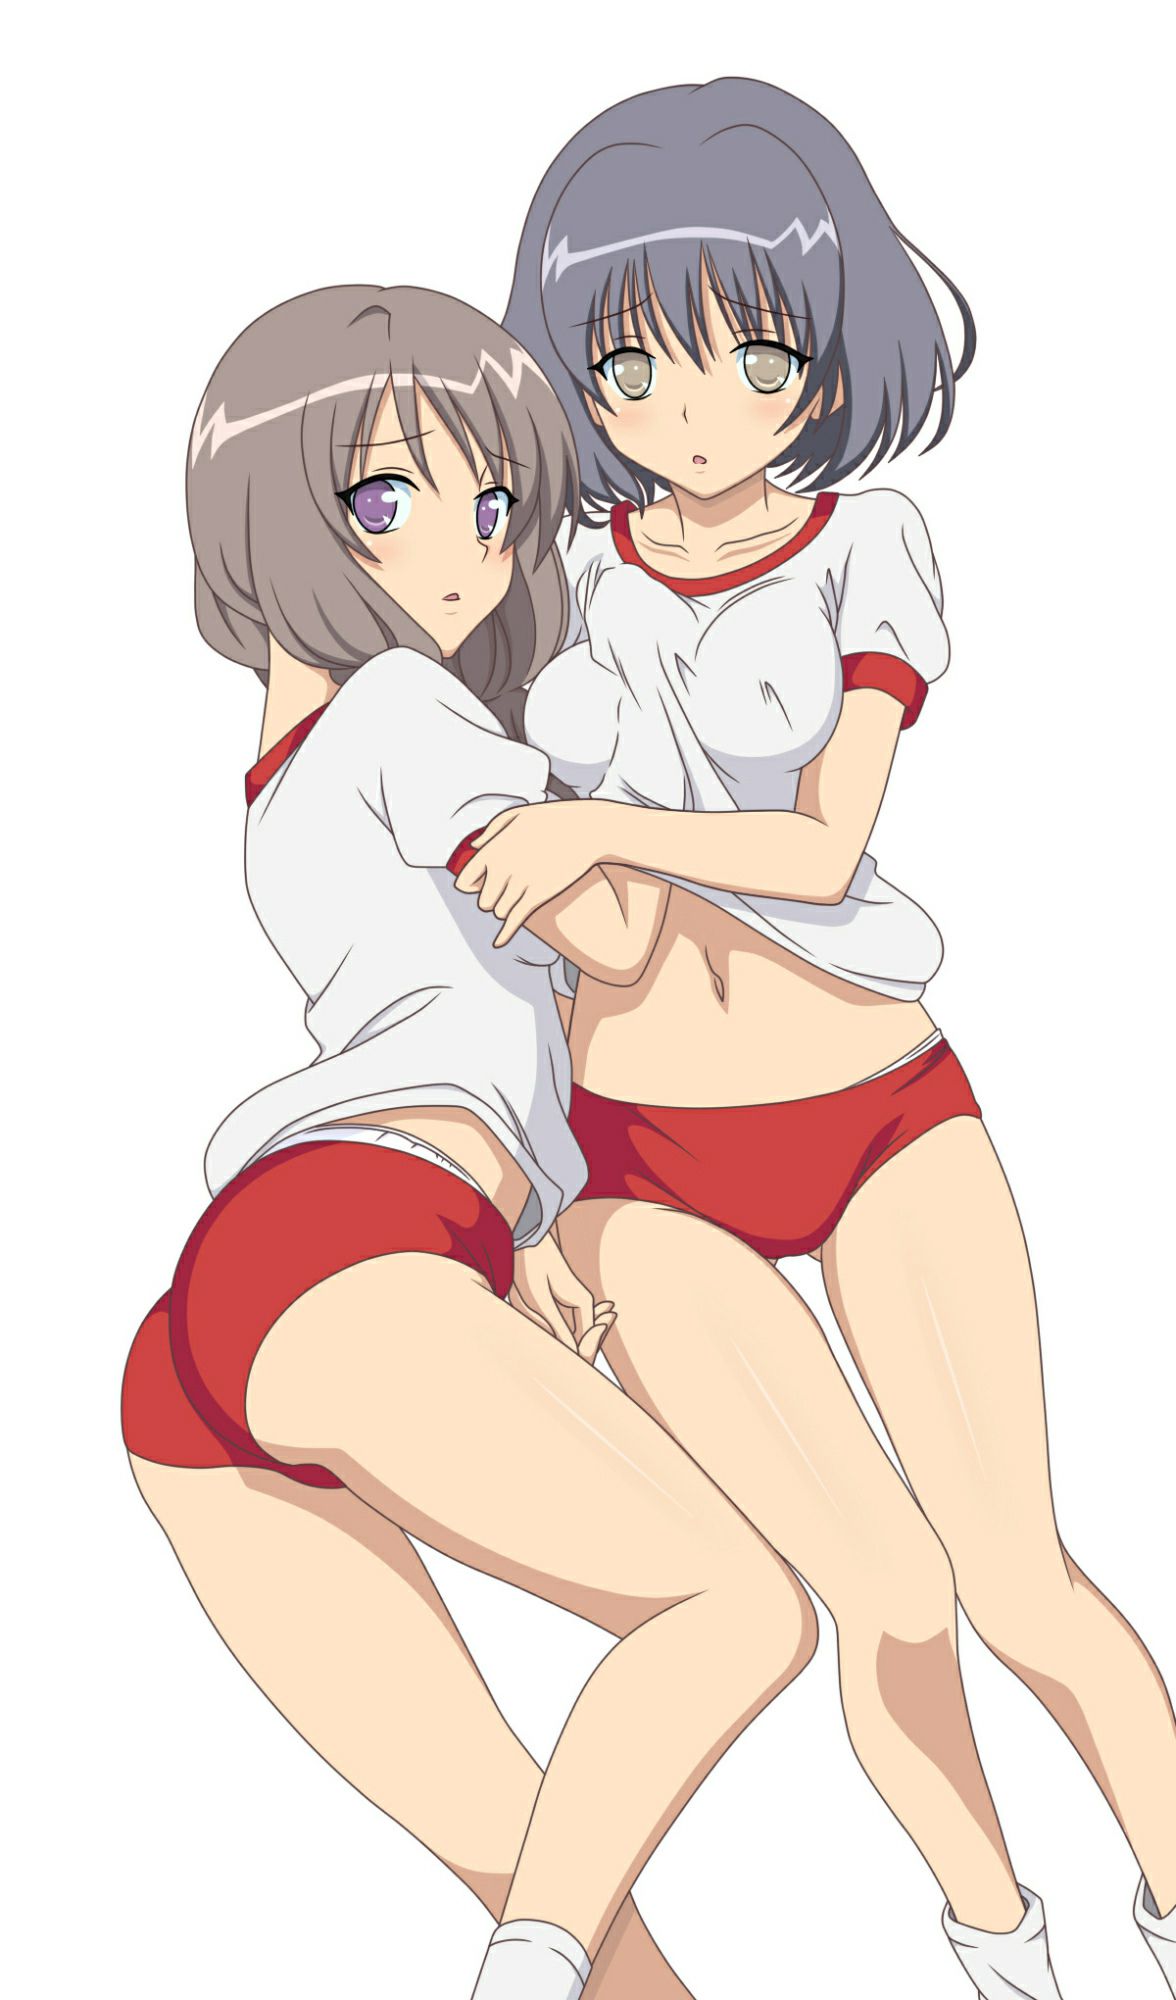 [Sad report] bloomers image in large quantities because it is a disease that will die if you do not see the bloomers daughter on a regular basis 07 [gym uniform] 15